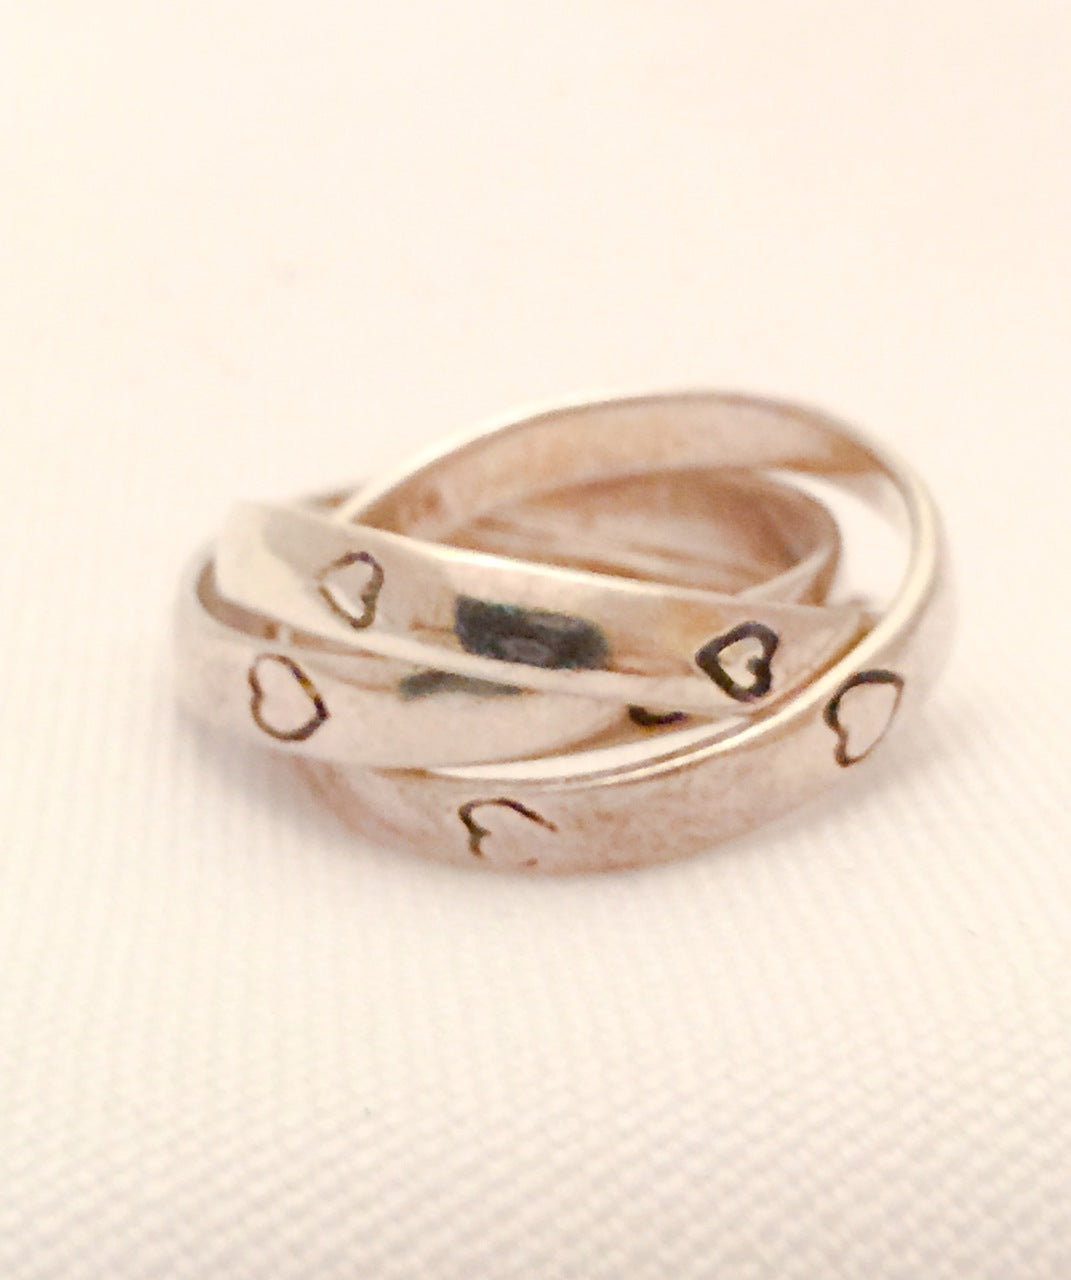 Vintage Sterling Silver Rolling Ring with Heart Design Size 6.25